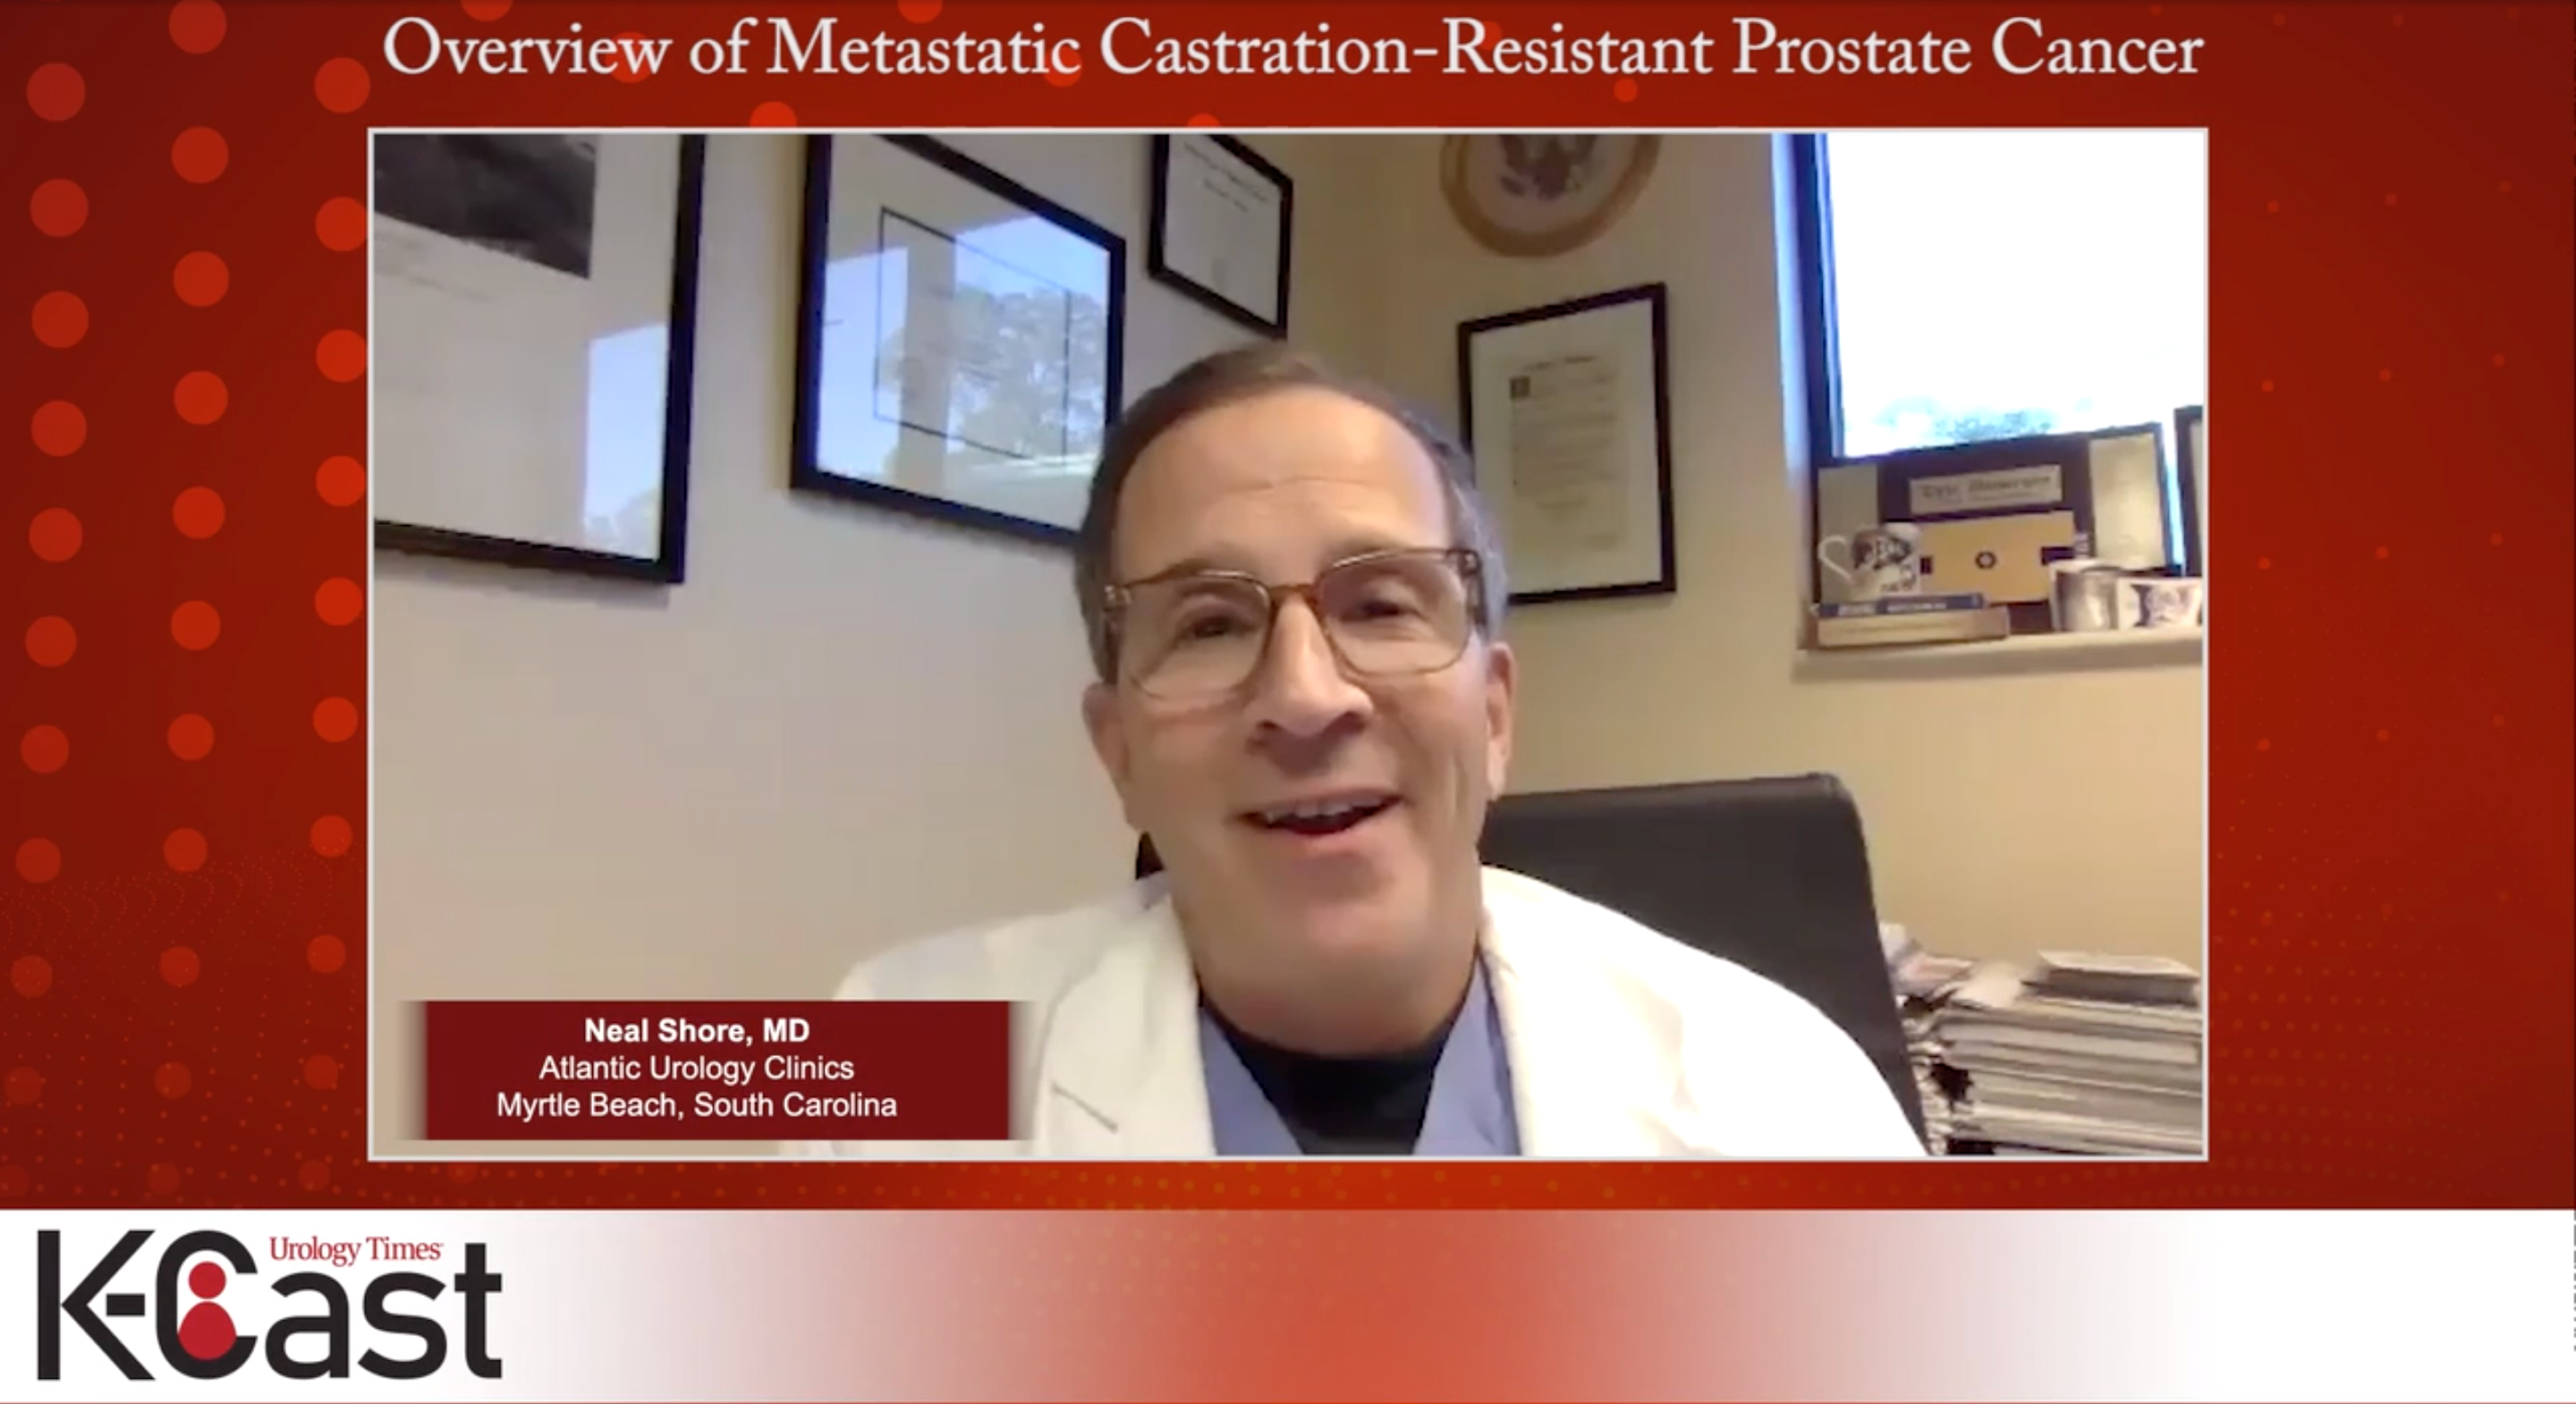 Treatment Options in Metastatic Castration-Resistant Prostate Cancer: A Year In Review